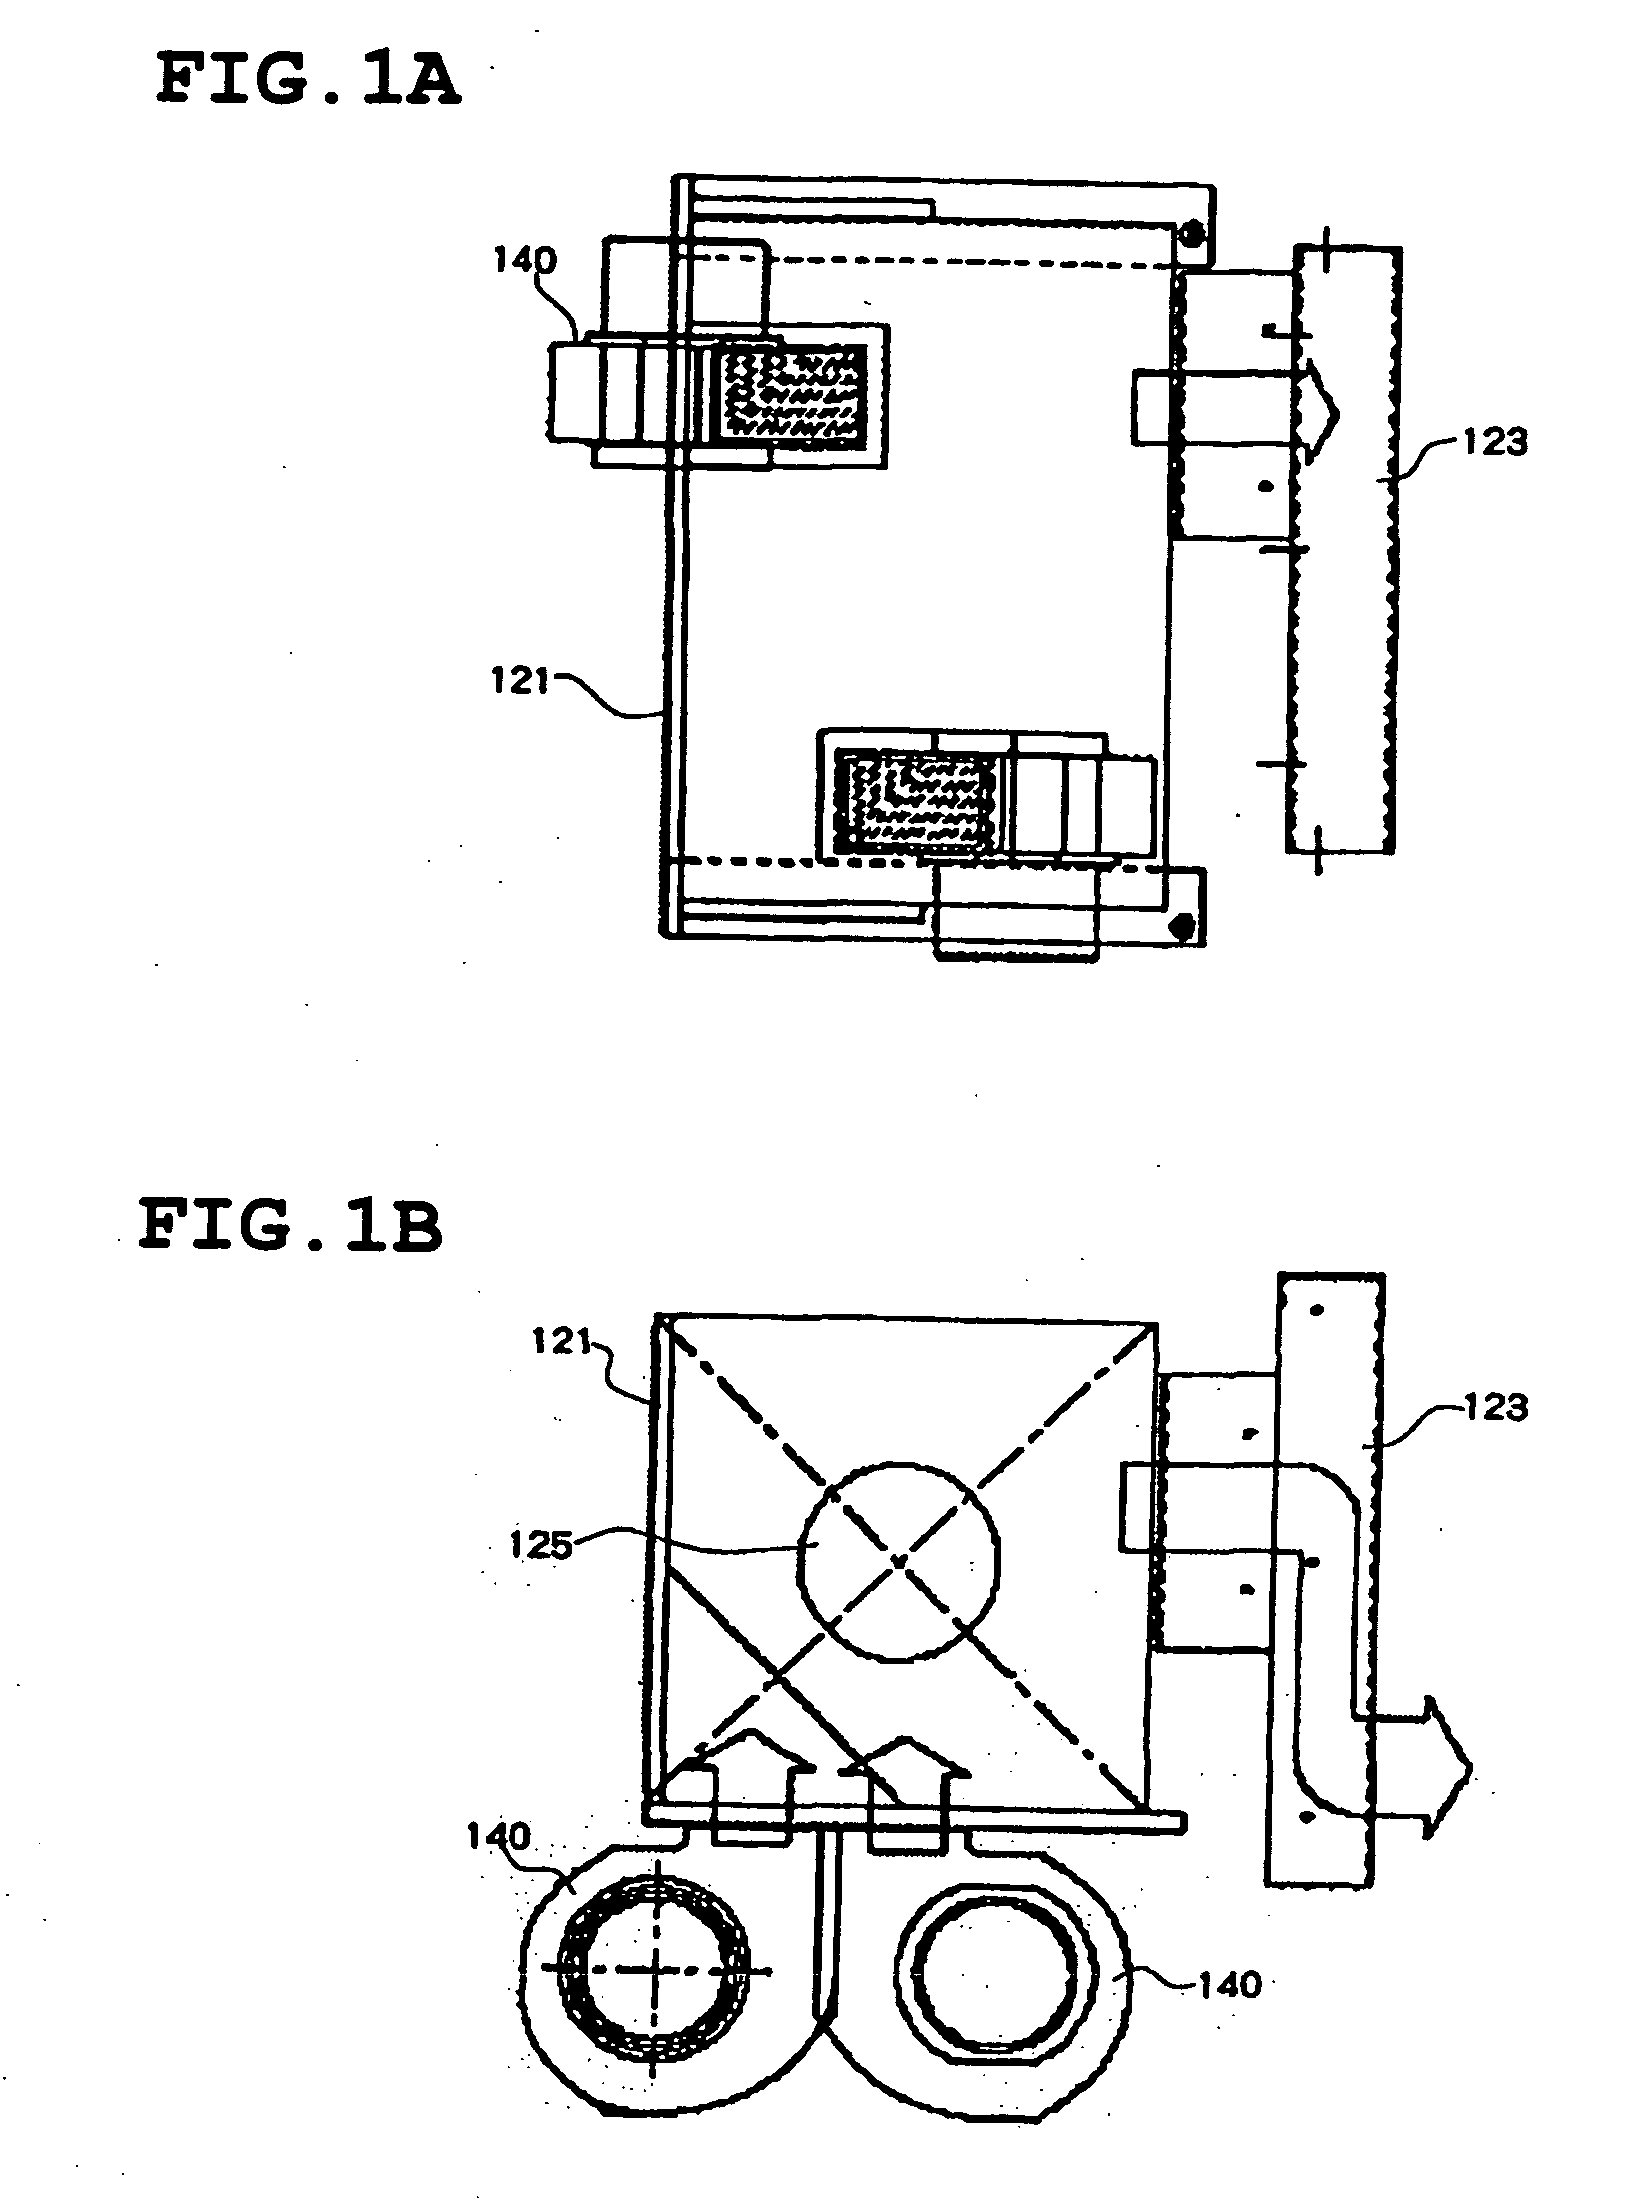 Structure for cooling a lamp for a projection display apparatus having an integrated exhaust duct